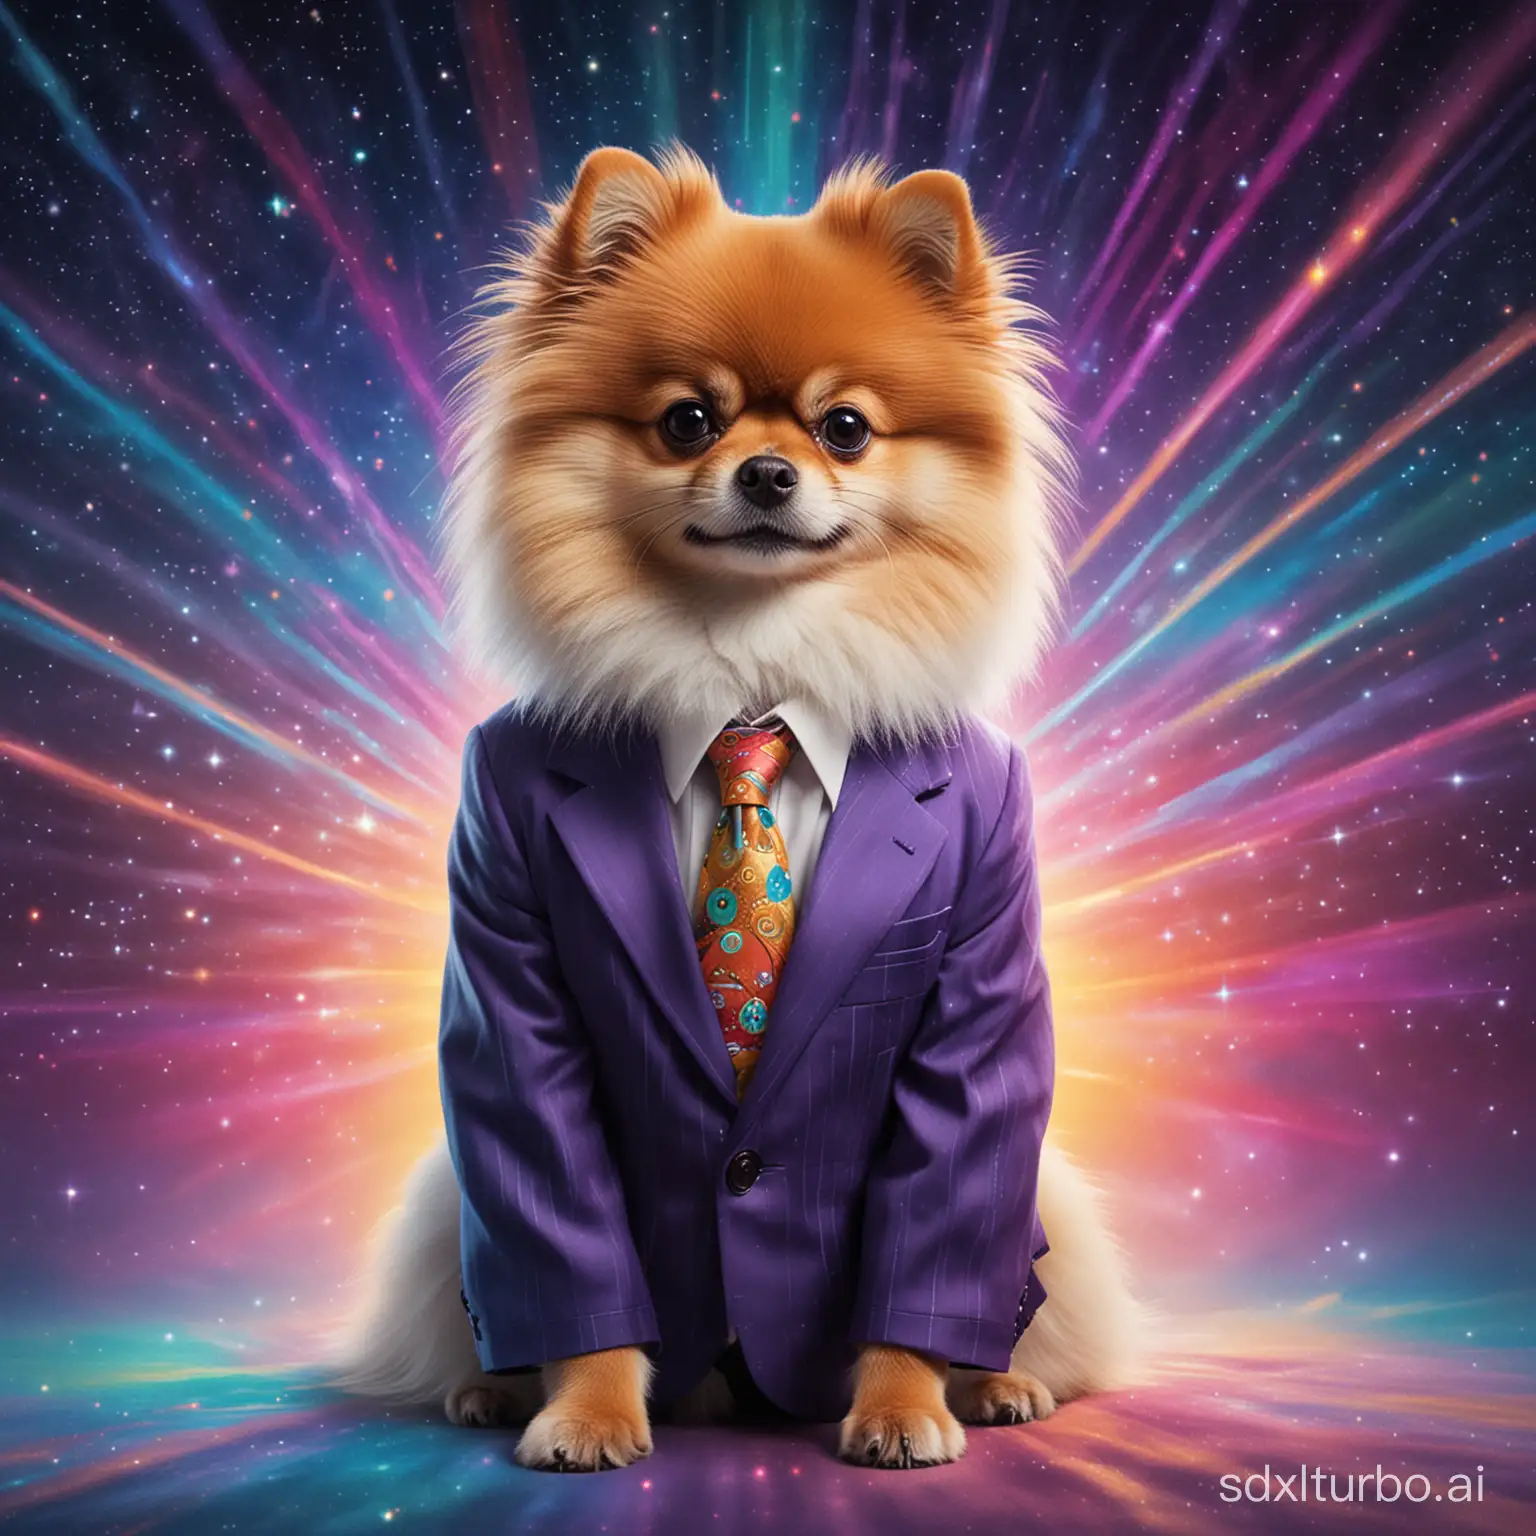 A Pomeranian a wearing a business suit conducting very important Pomeranian matters in a psychedelic hyperspace